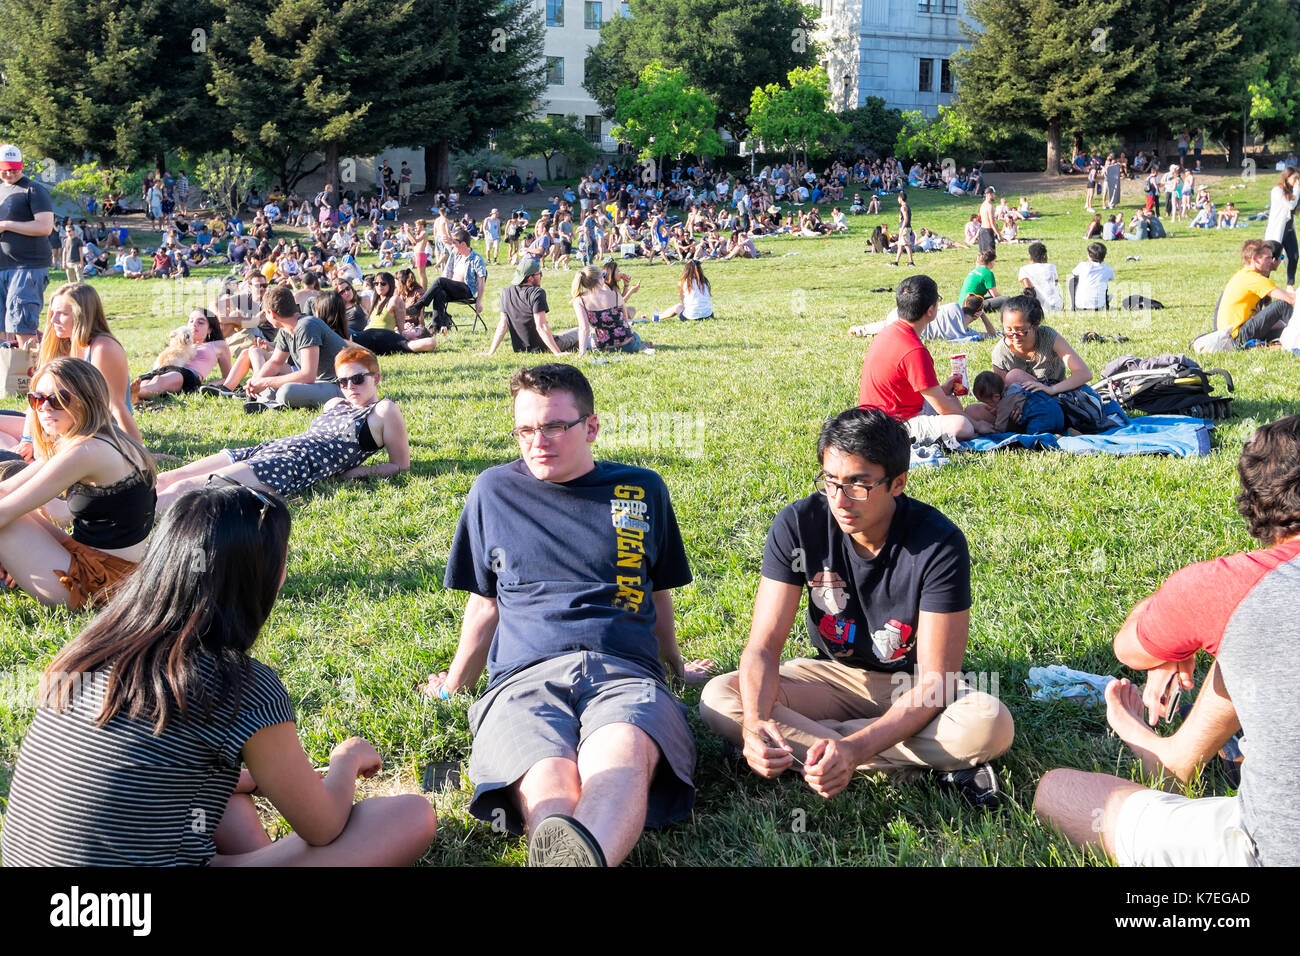 BERKELEY, CA- Apr 17, 2016: Crowds of students at the University of California Berkeley relaxing outdoors in the sun on a grassy open space. Stock Photo